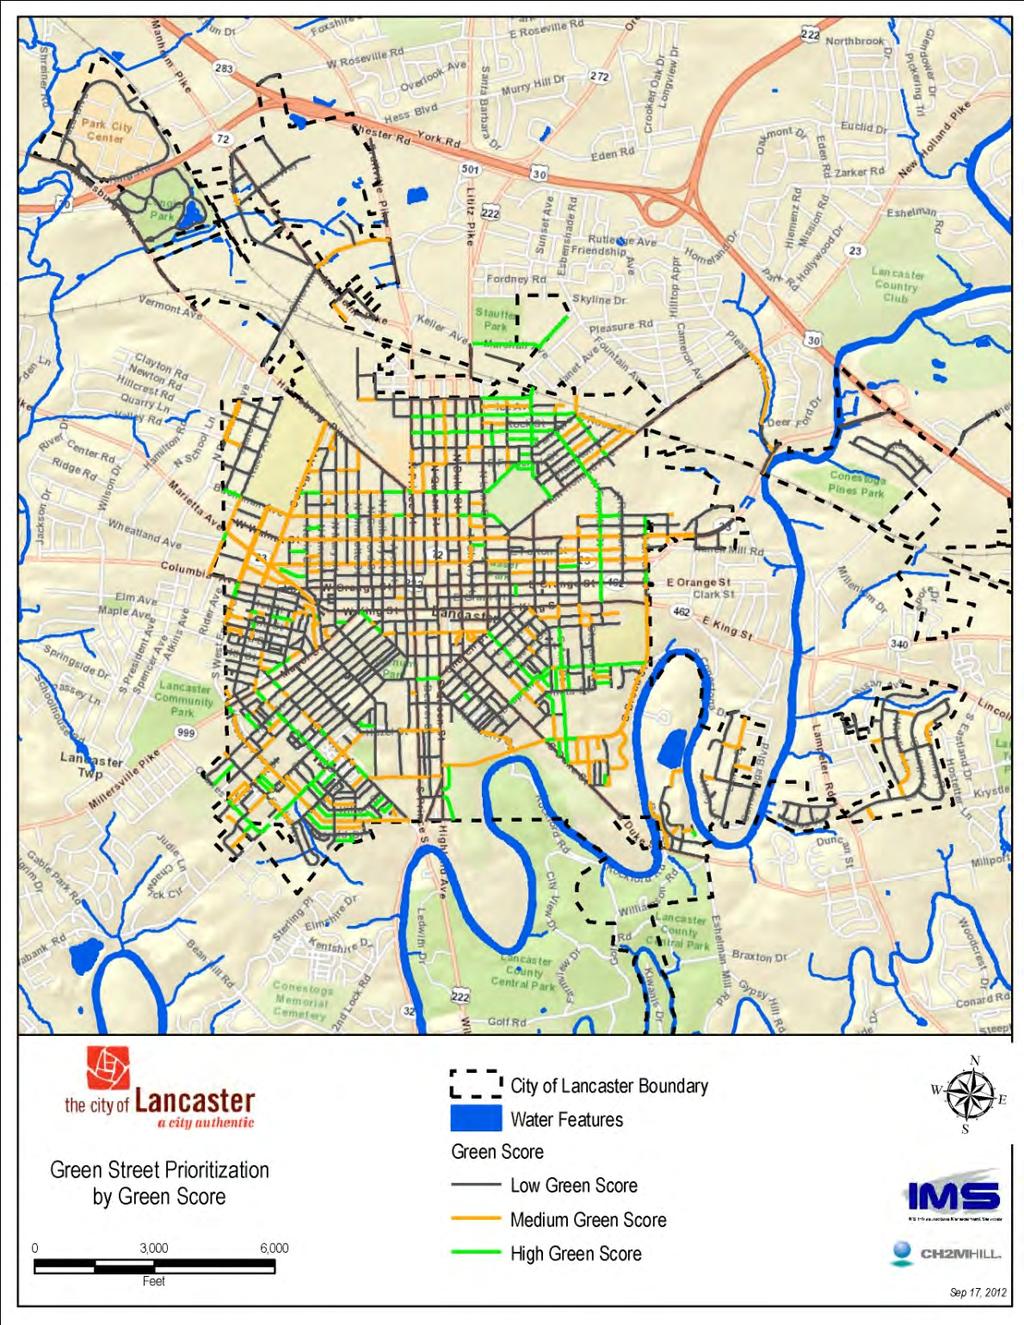 Green Streets Prioritization Results Enables cost sharing while integrating green